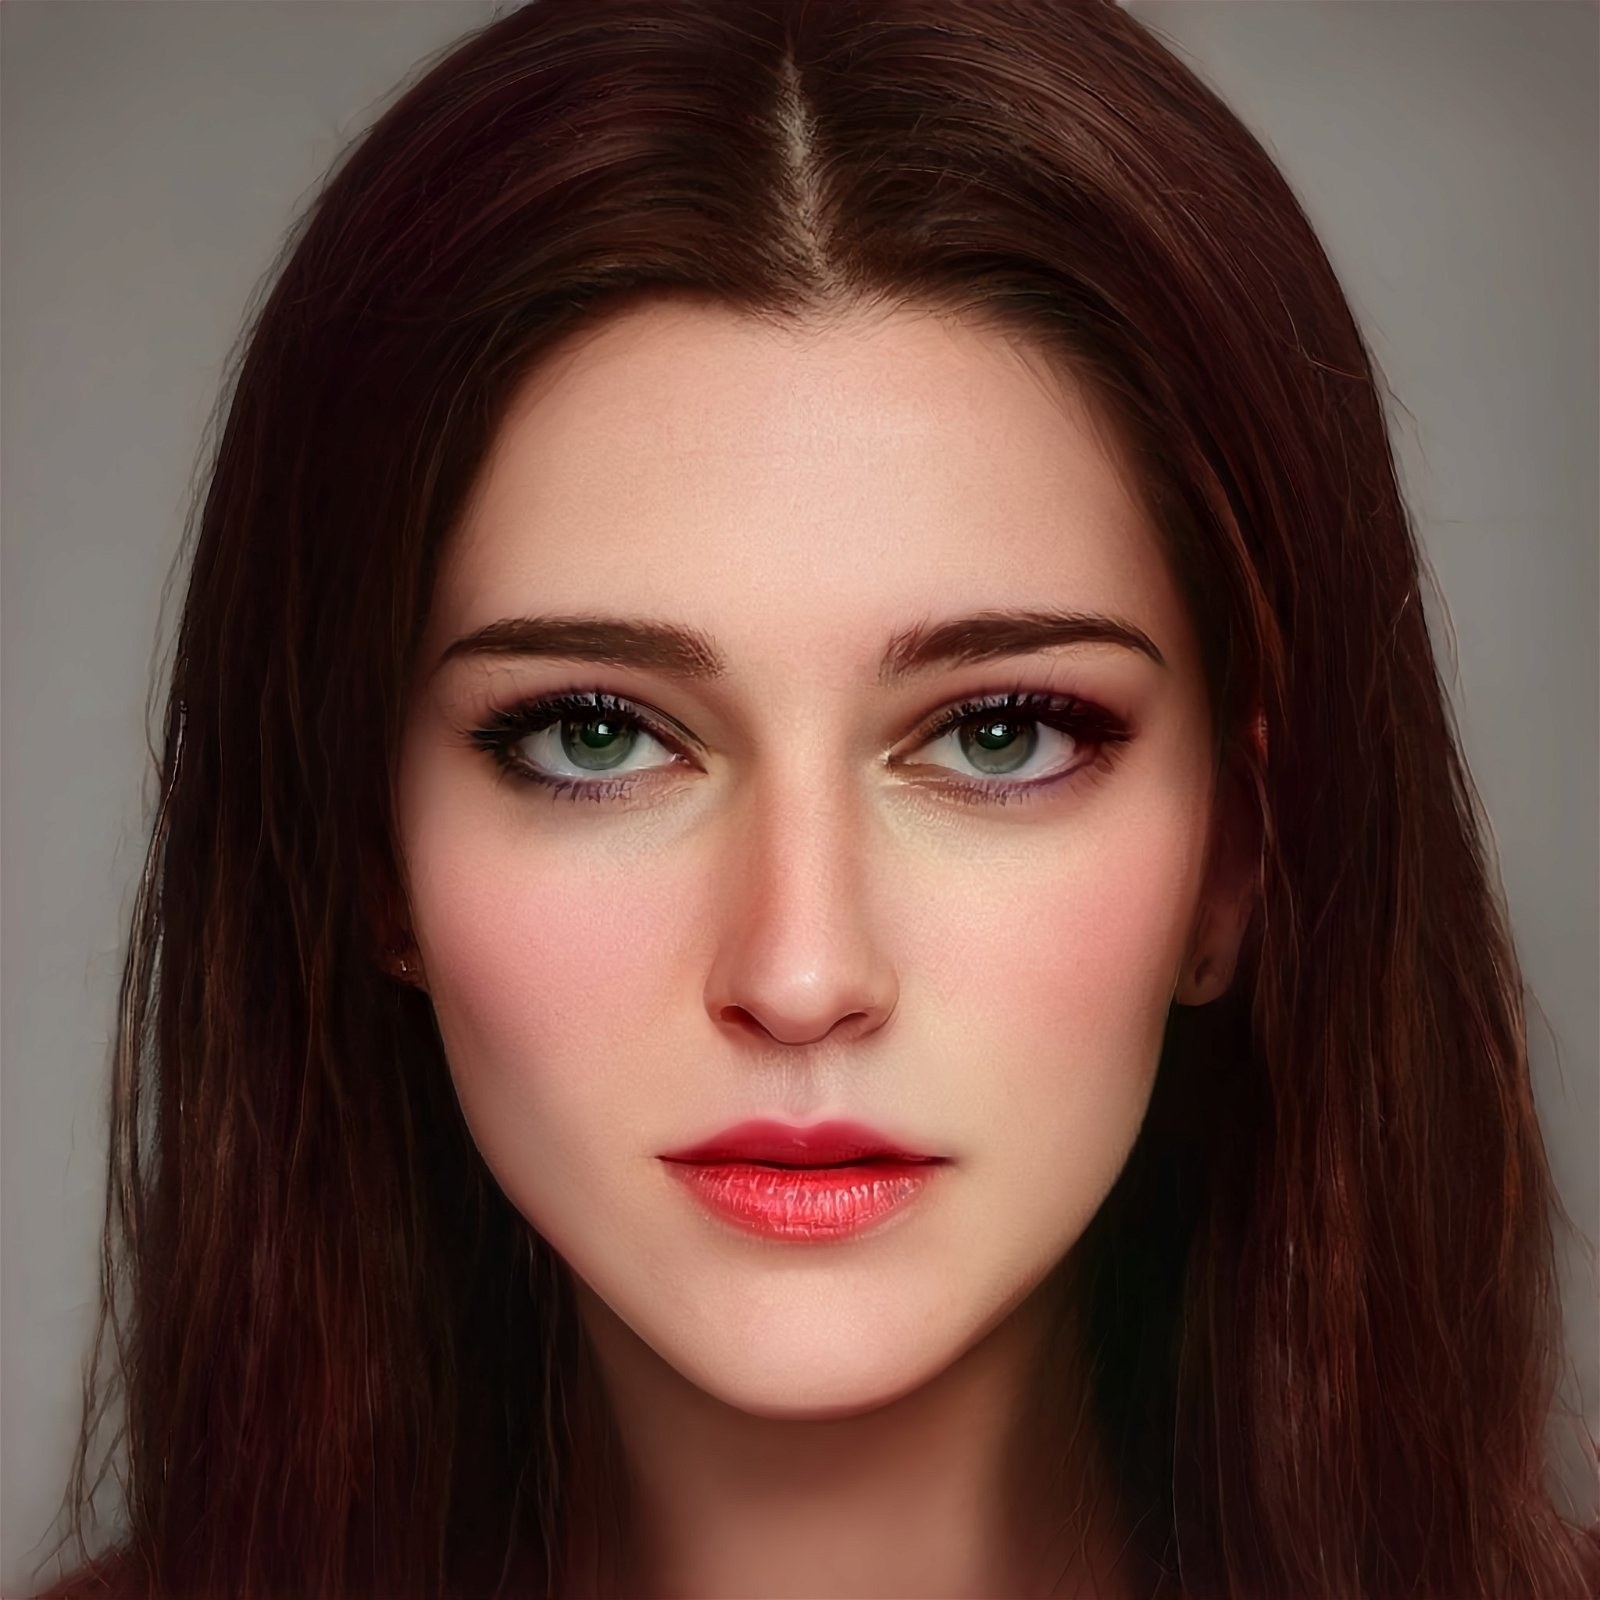 a teenage girl with brown hair and green eyes